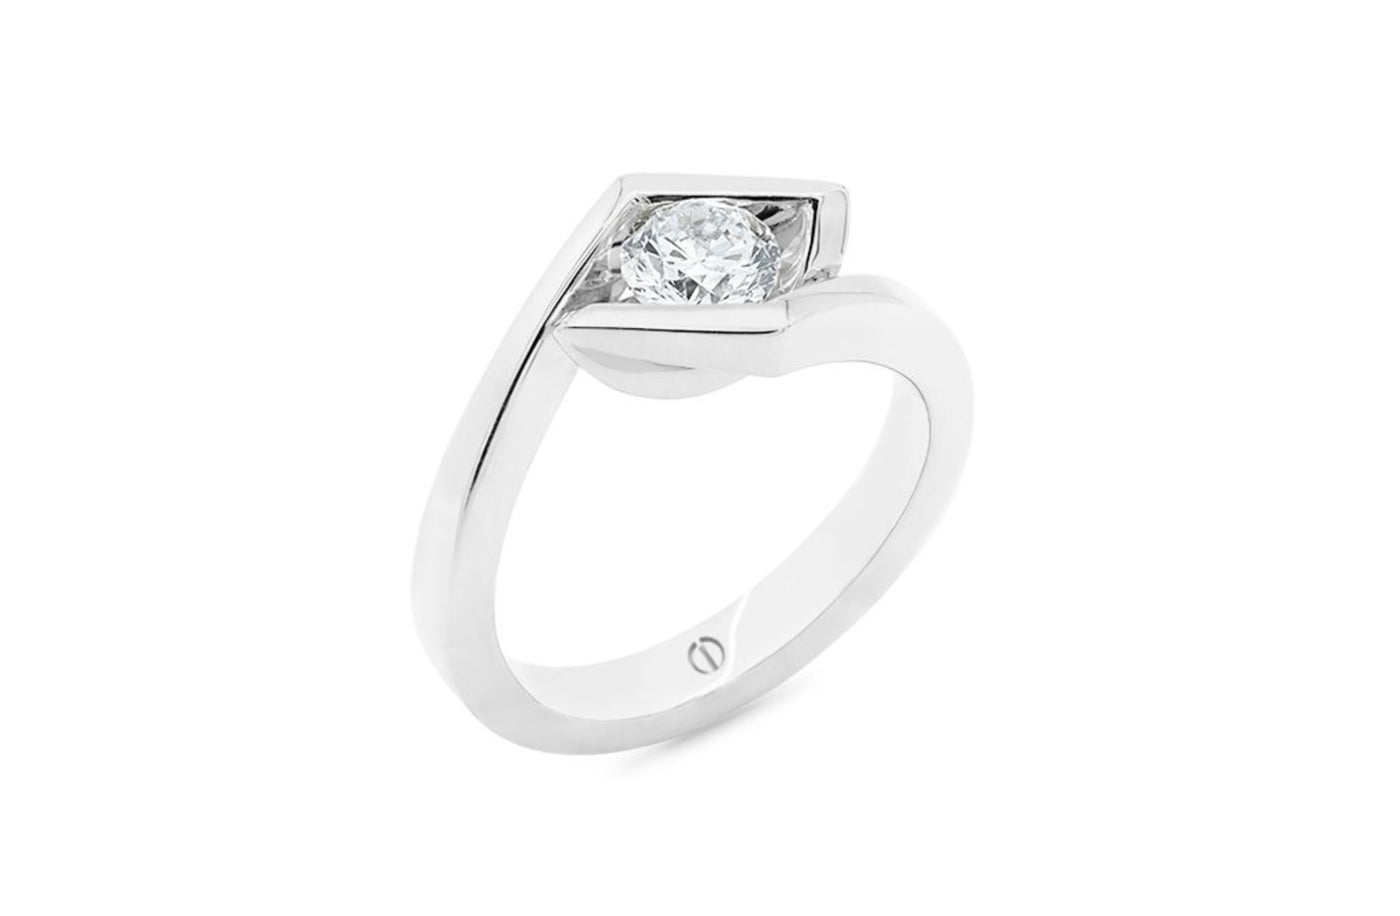 Inspired Collection, Crost, Platinum, 18k, 18ct White gold, Crossover, round diamond, delicate, brilliant cut, specialist, jewellery, jewelry, engagement ring, ring design, inspired design